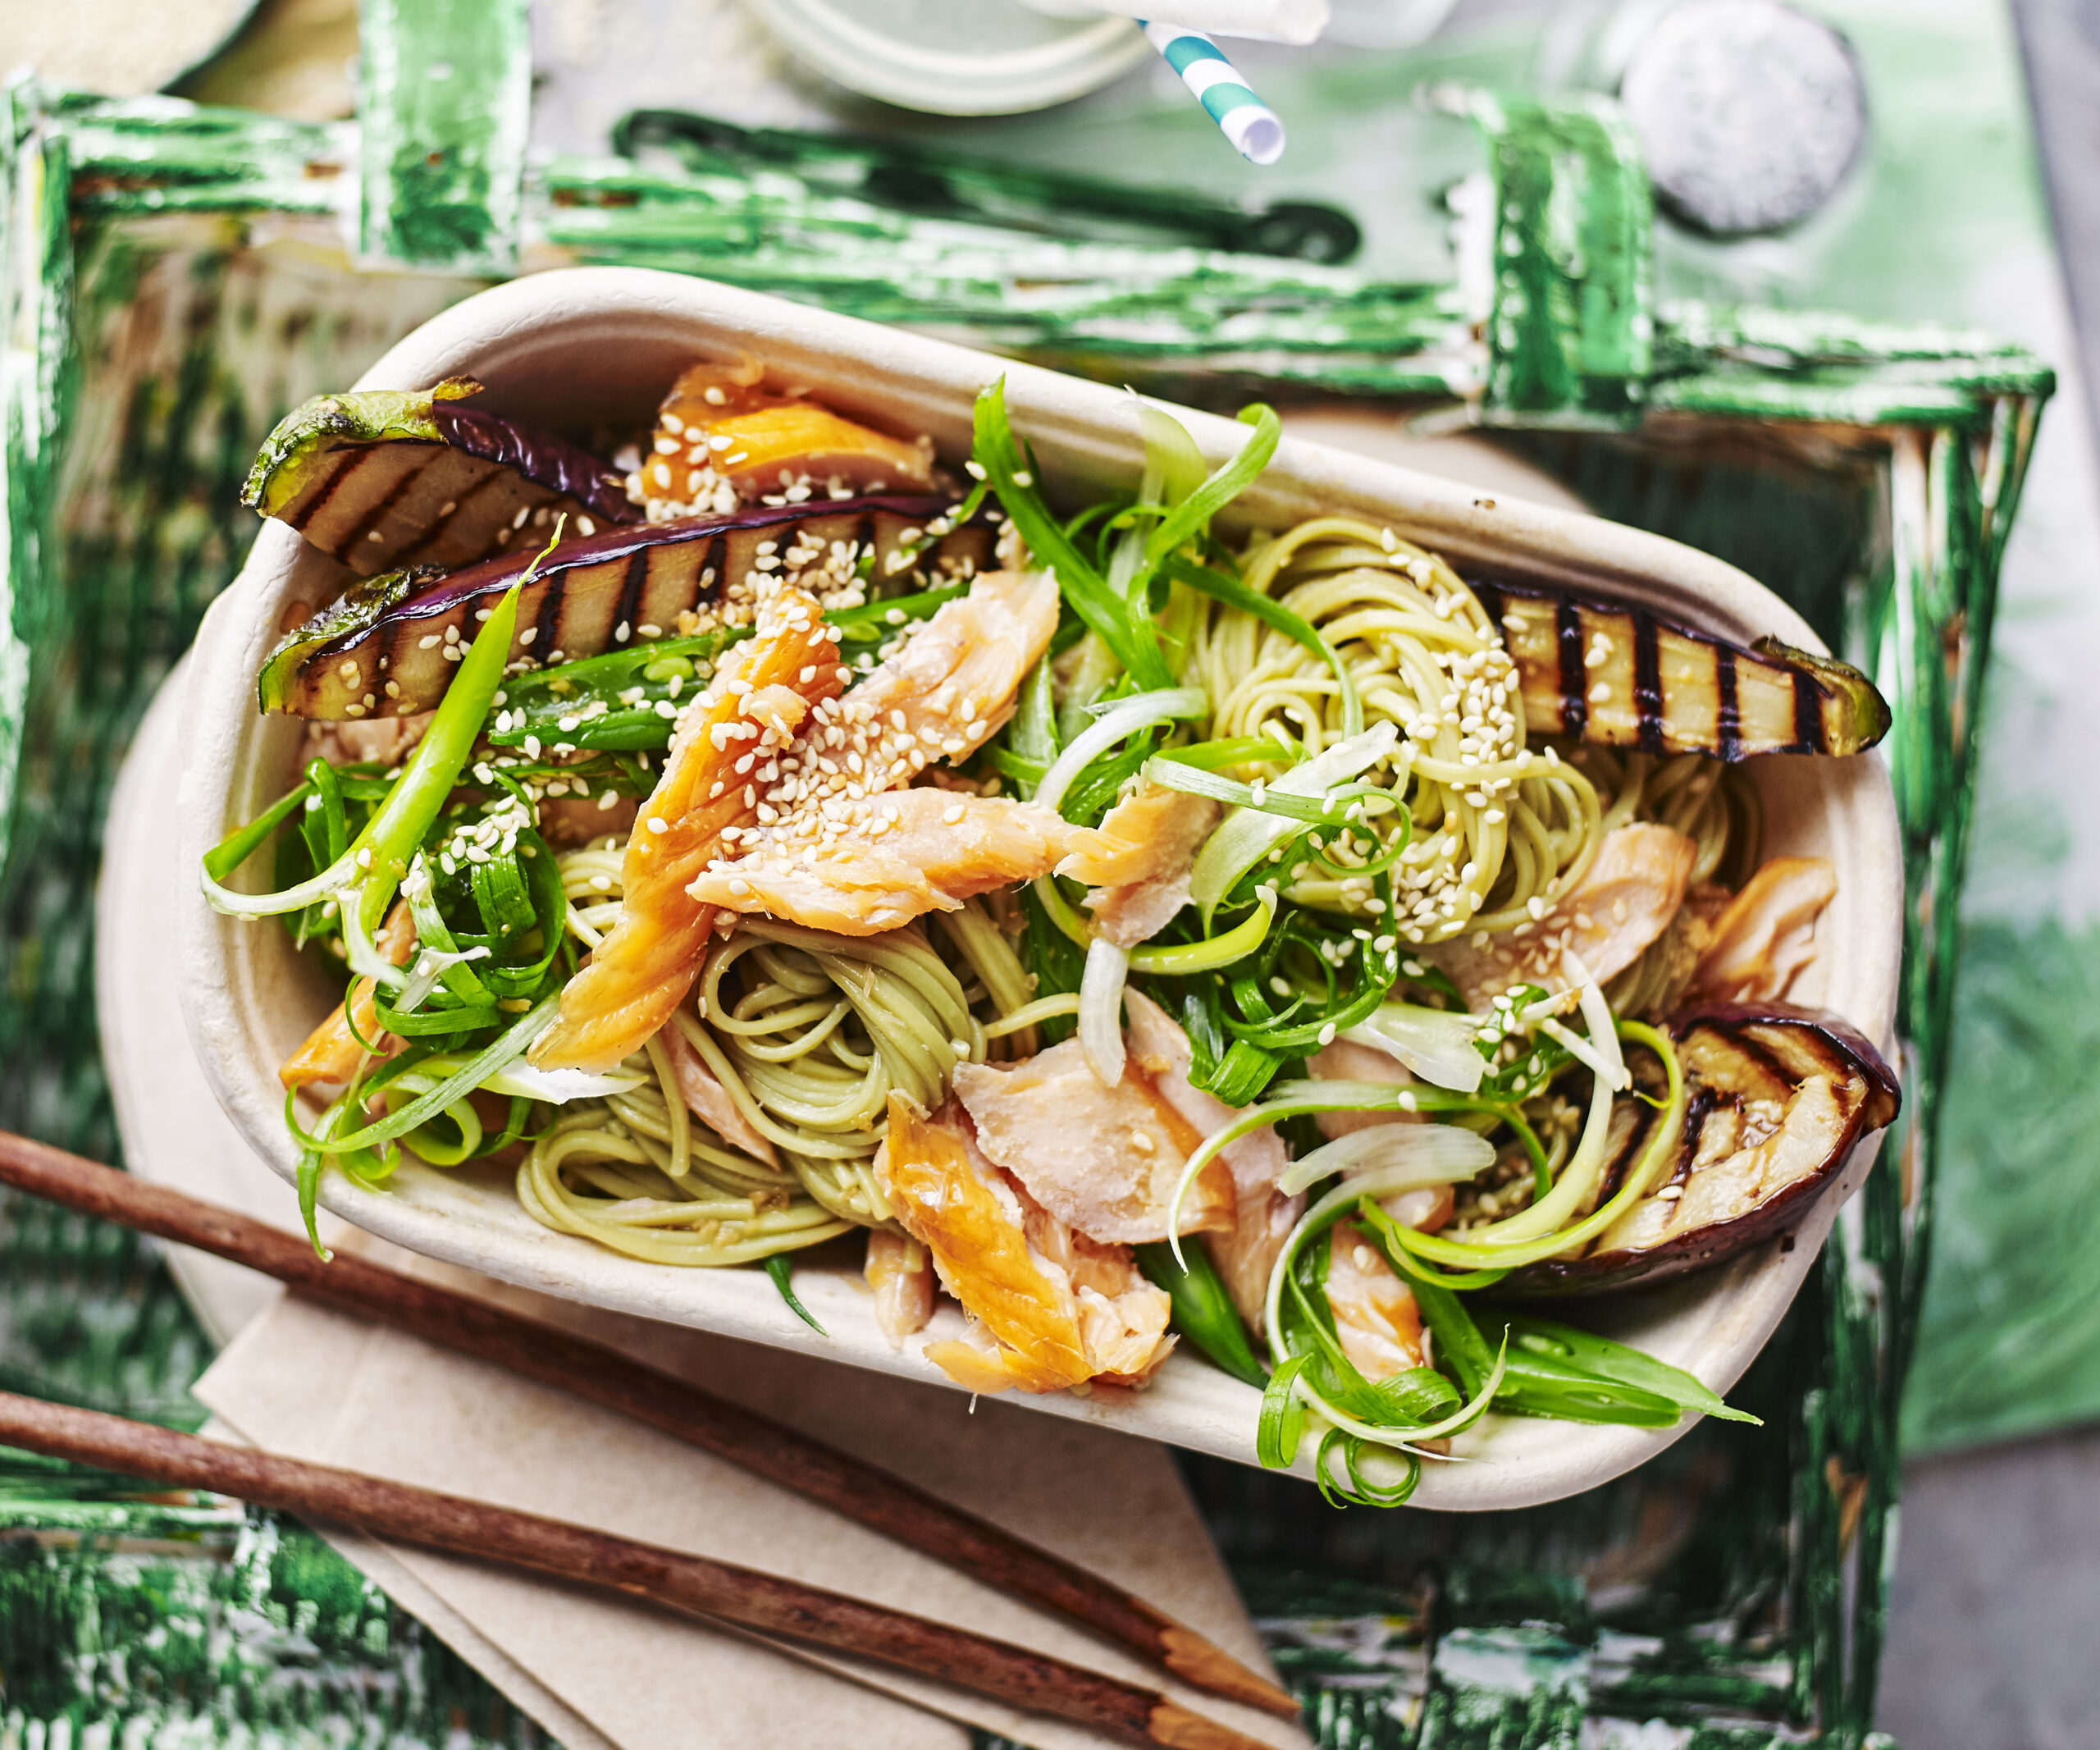 Eggplant noodle salad with smoked trout